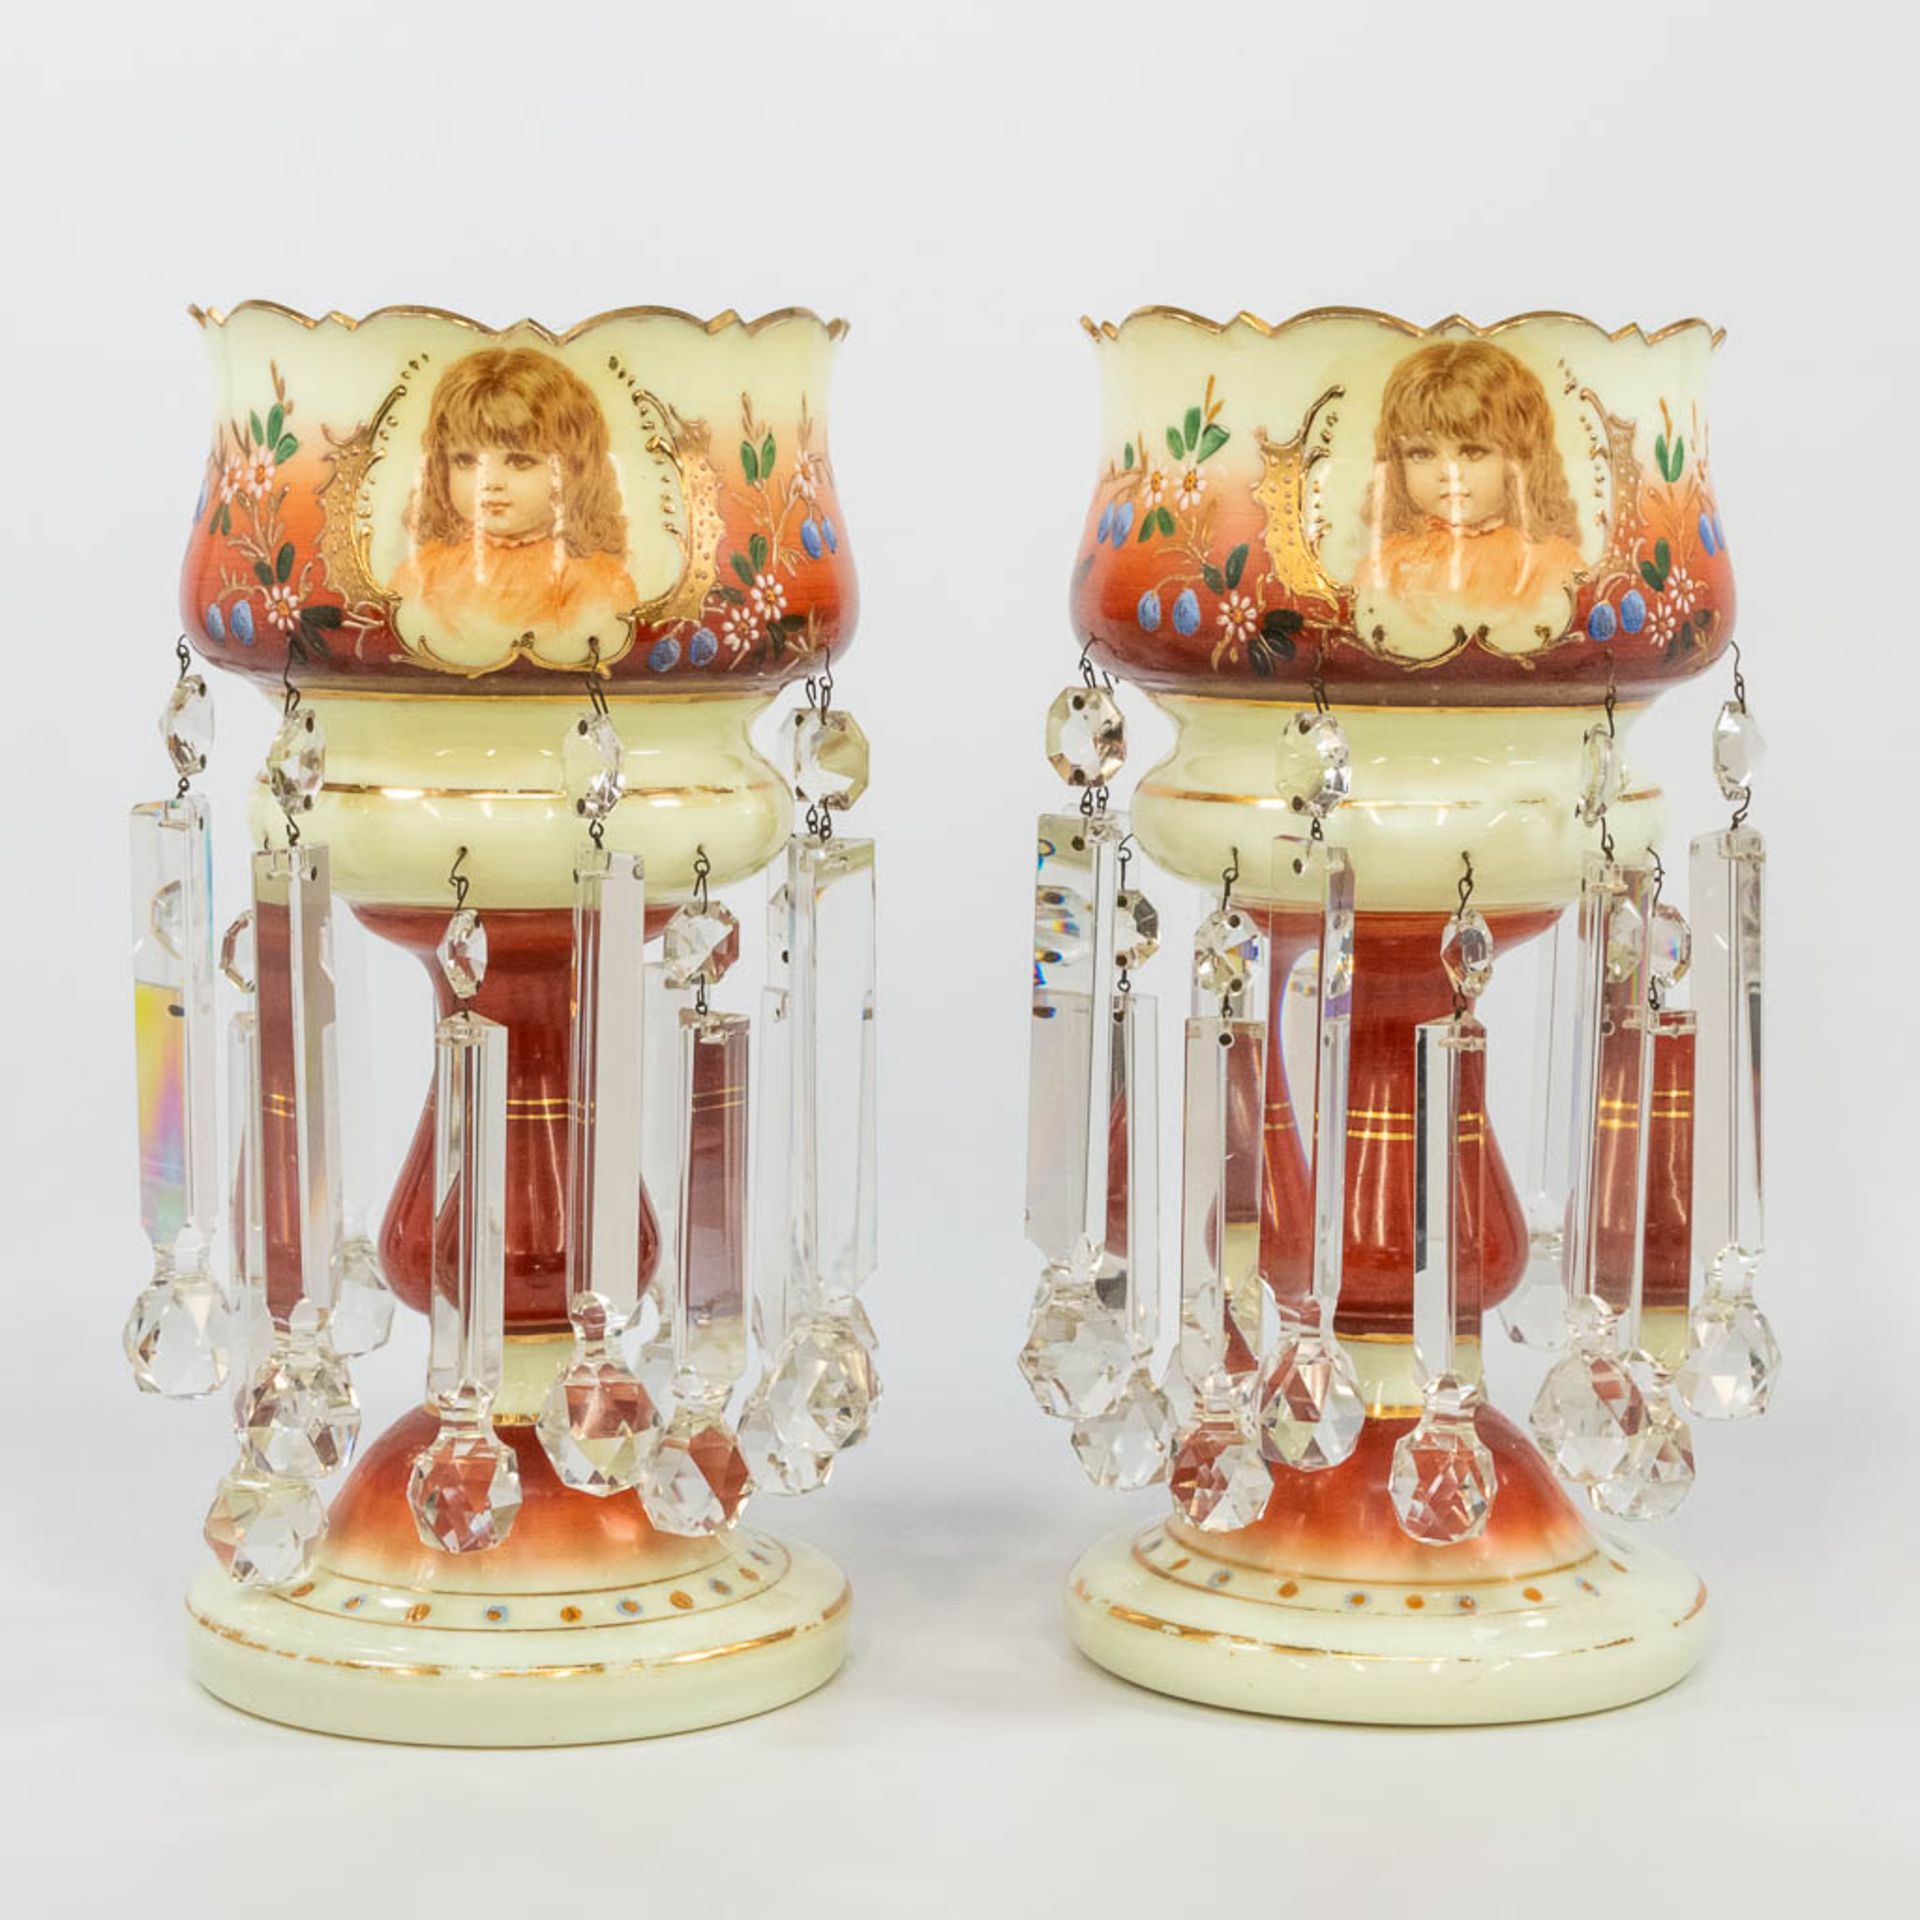 A pair of glass lustres, with hand-painted flowerdecor and printed images of children. (36 x 17,5 cm